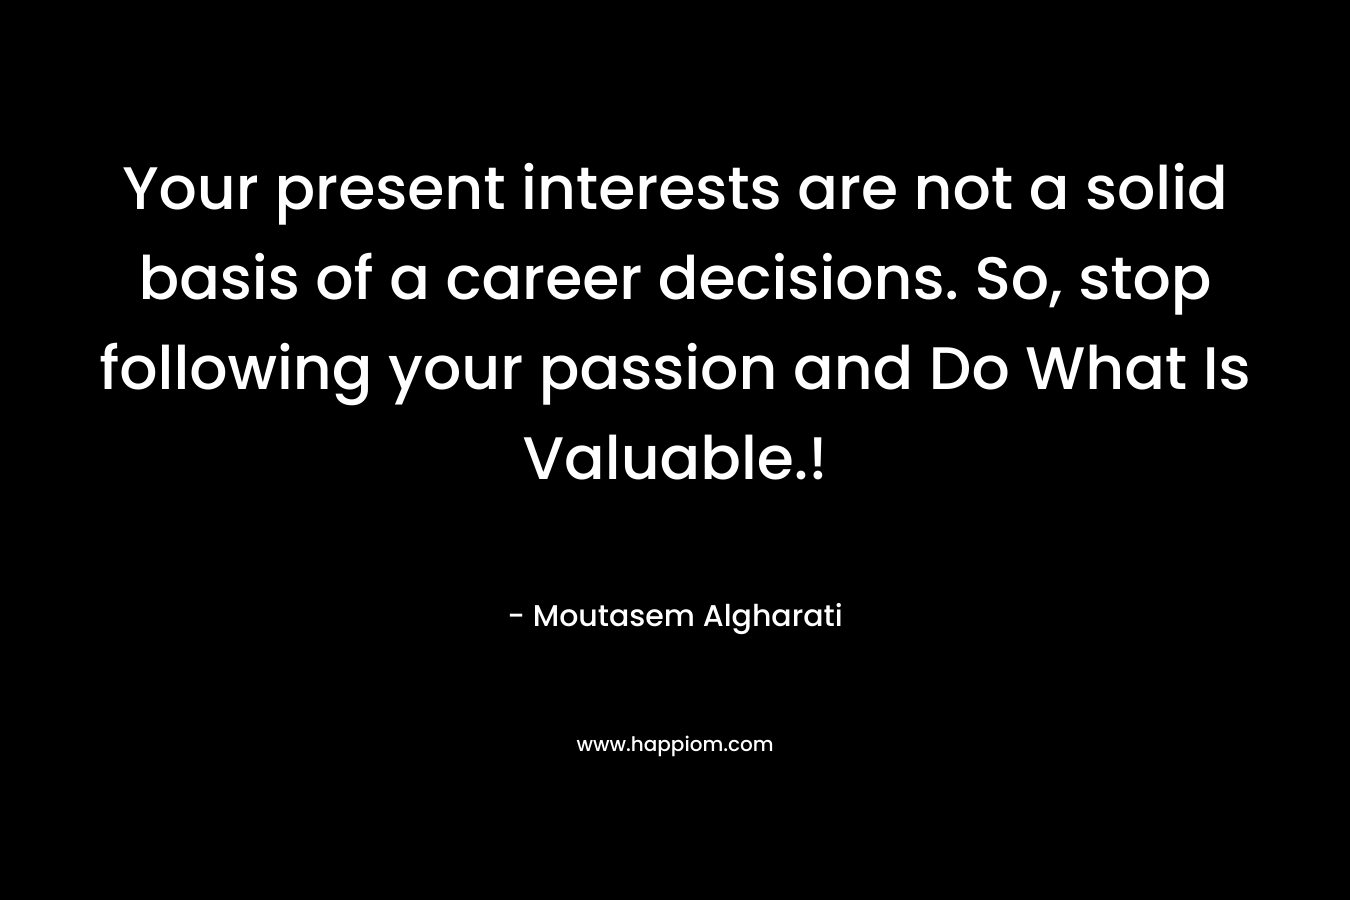 Your present interests are not a solid basis of a career decisions. So, stop following your passion and Do What Is Valuable.!